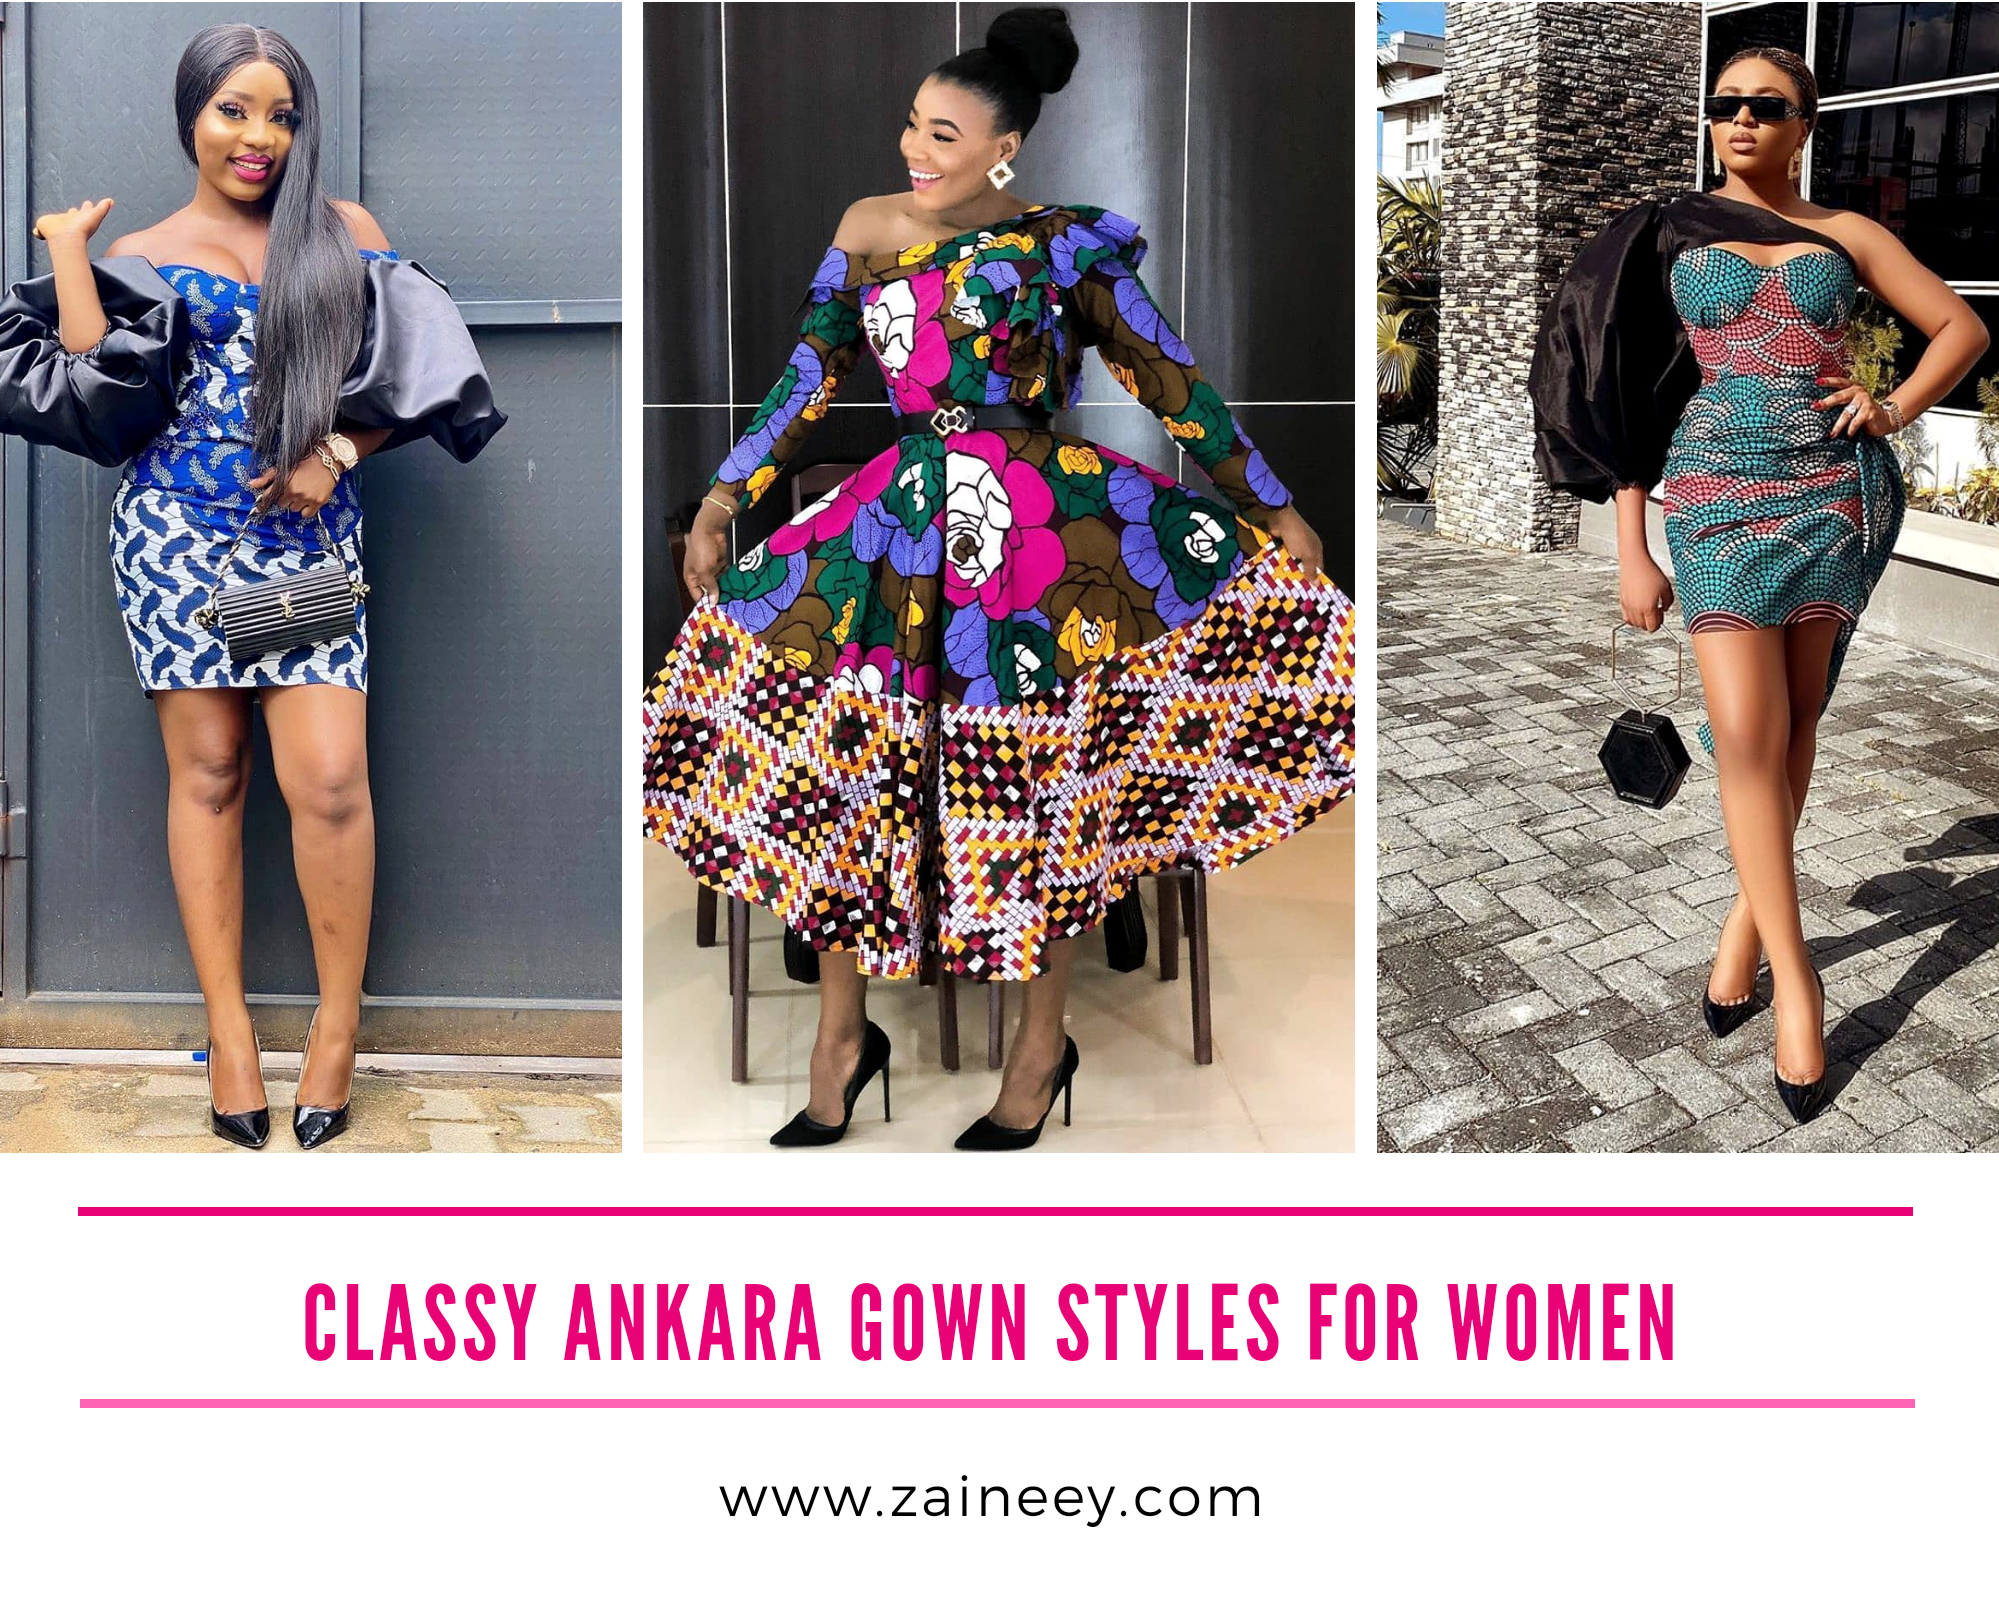 Classy Ankara Gown Styles for Women: Unique African Dress Inspiration